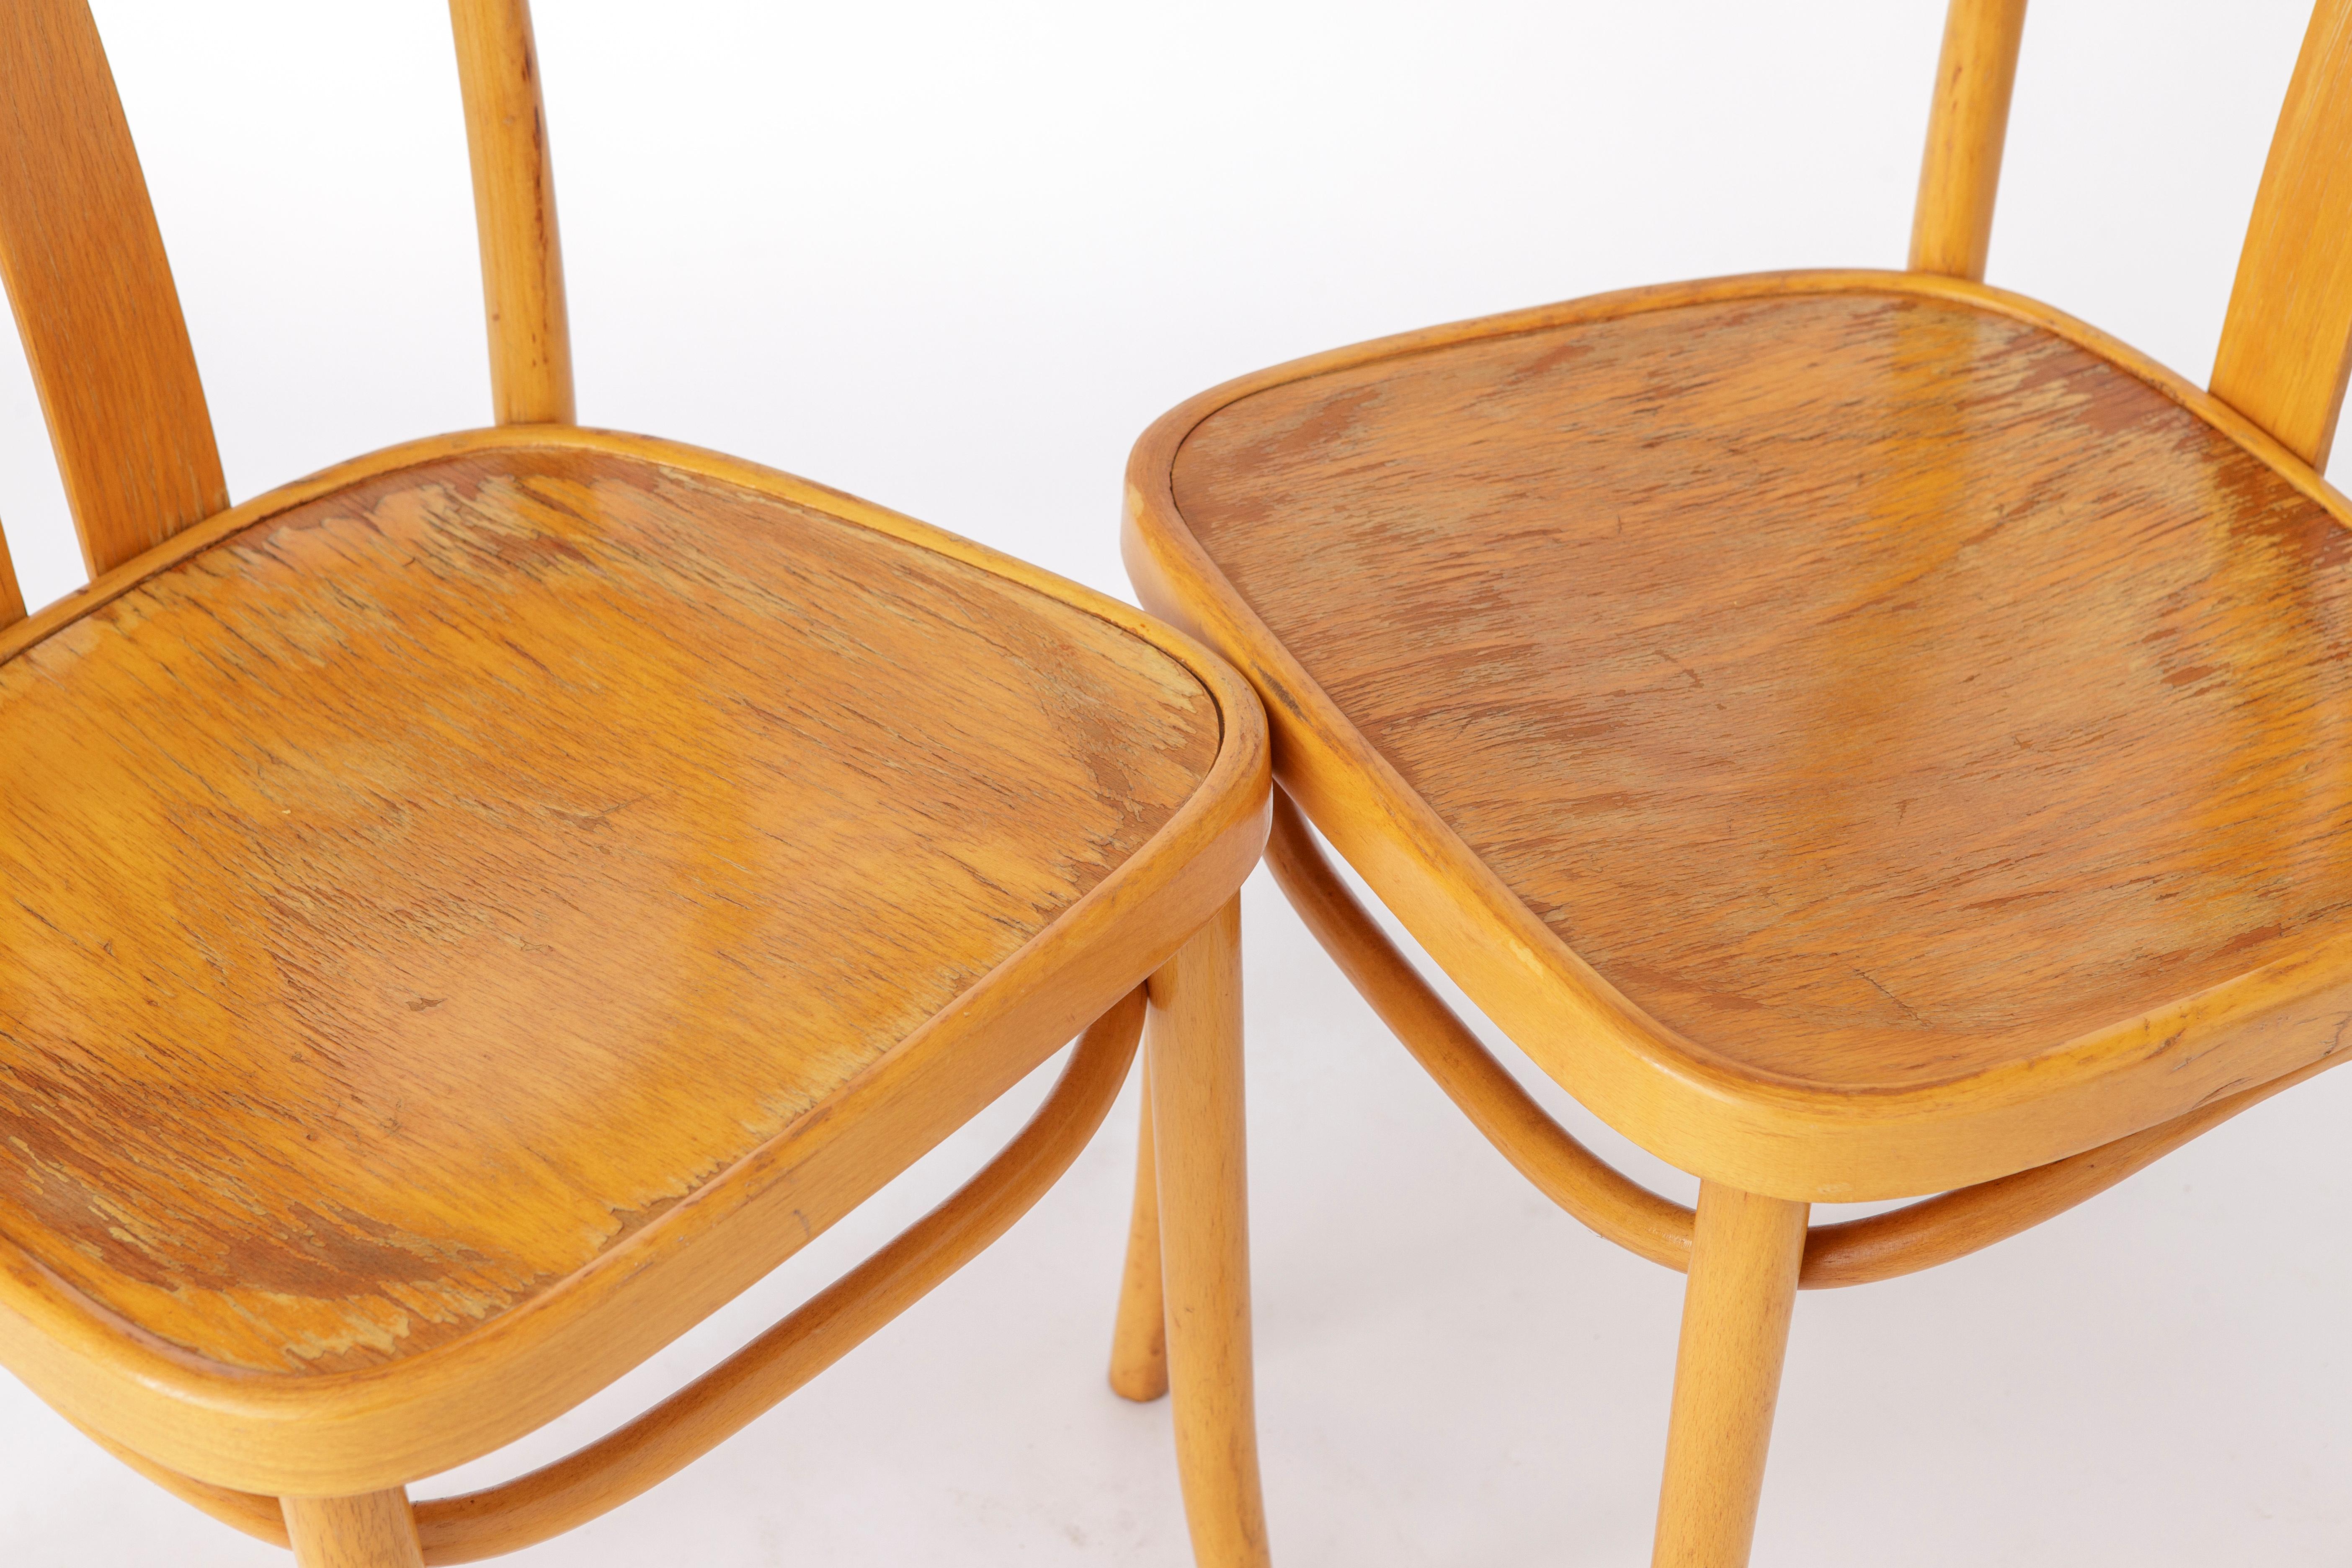 2 Vintage IKEA Chairs Lena by Radomsko 1970s Bentwood In Good Condition For Sale In Hannover, DE